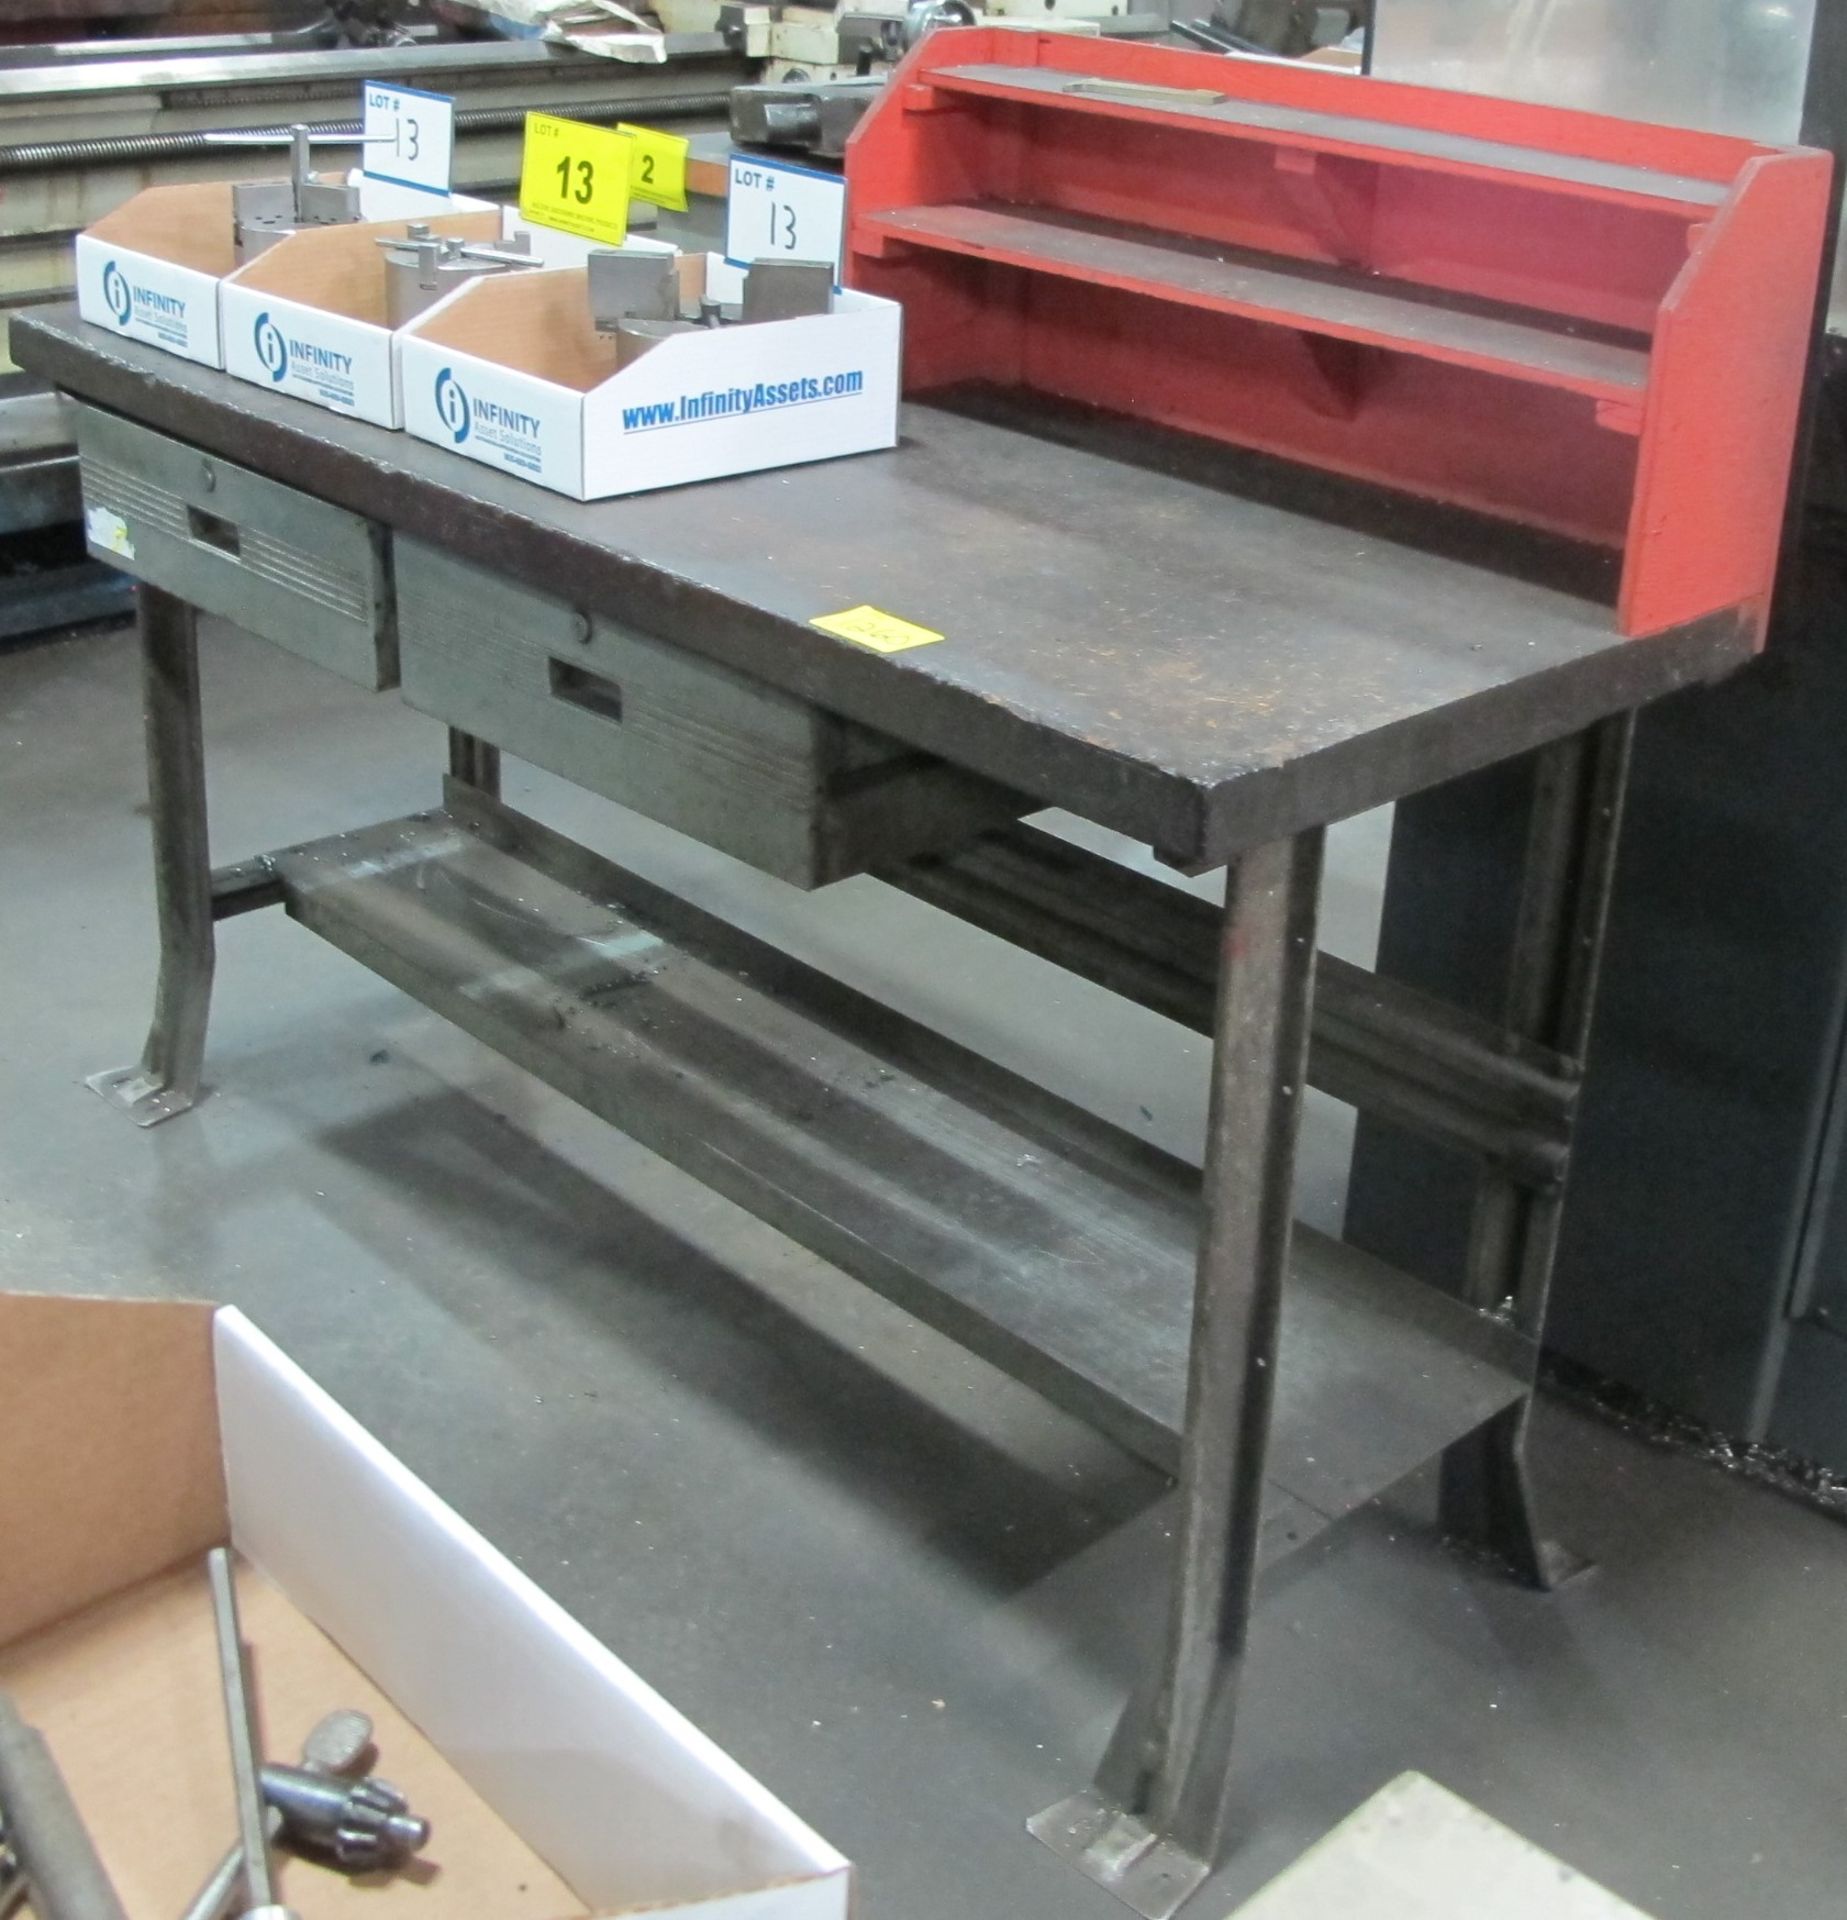 LOT OF (3) WORKBENCHES (NO CONTENTS) - Image 4 of 4